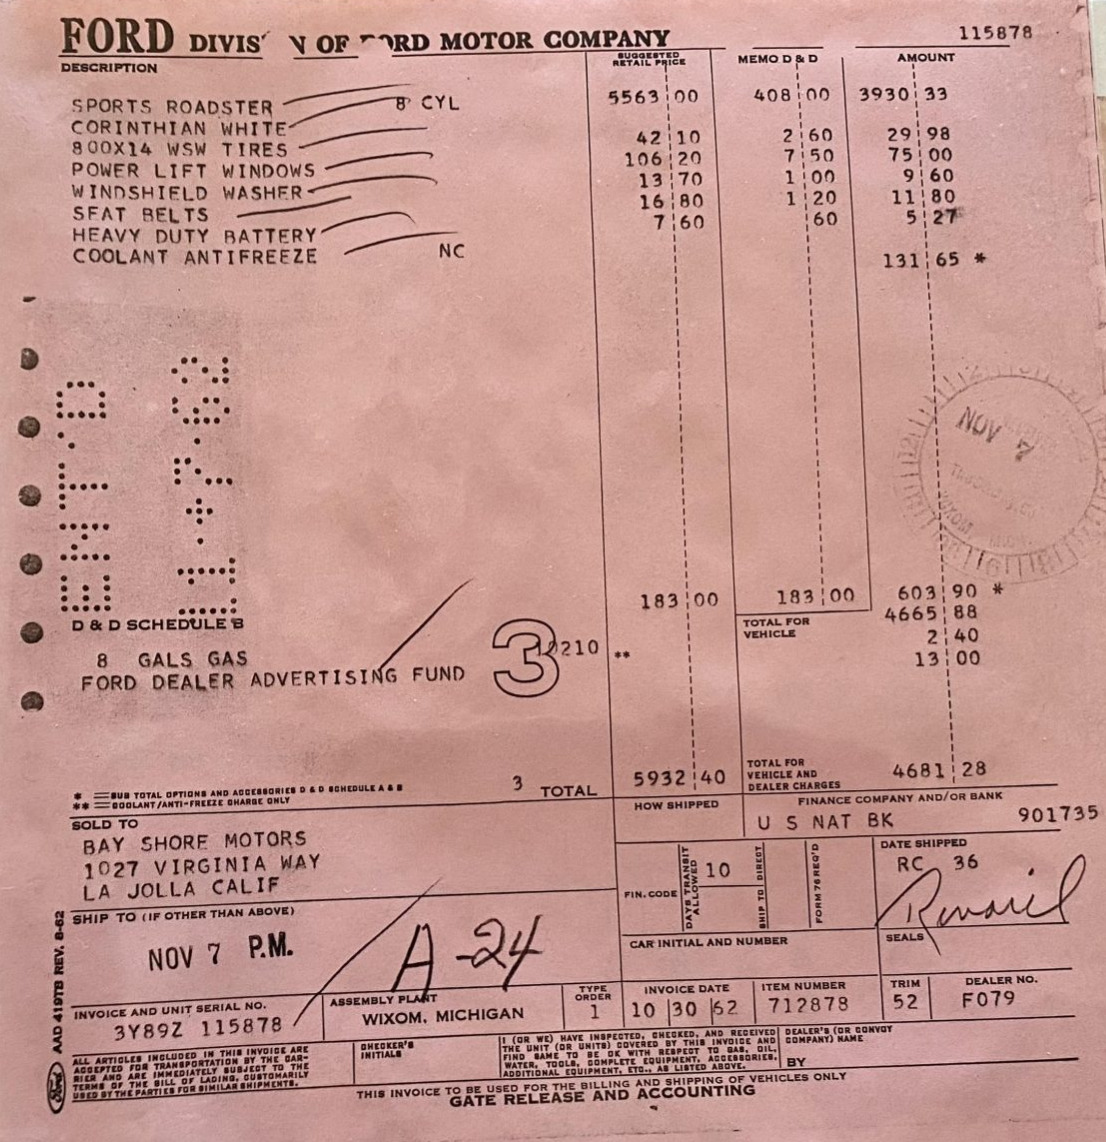 1963 Ford Thunderbird Sports Roadster Invoice